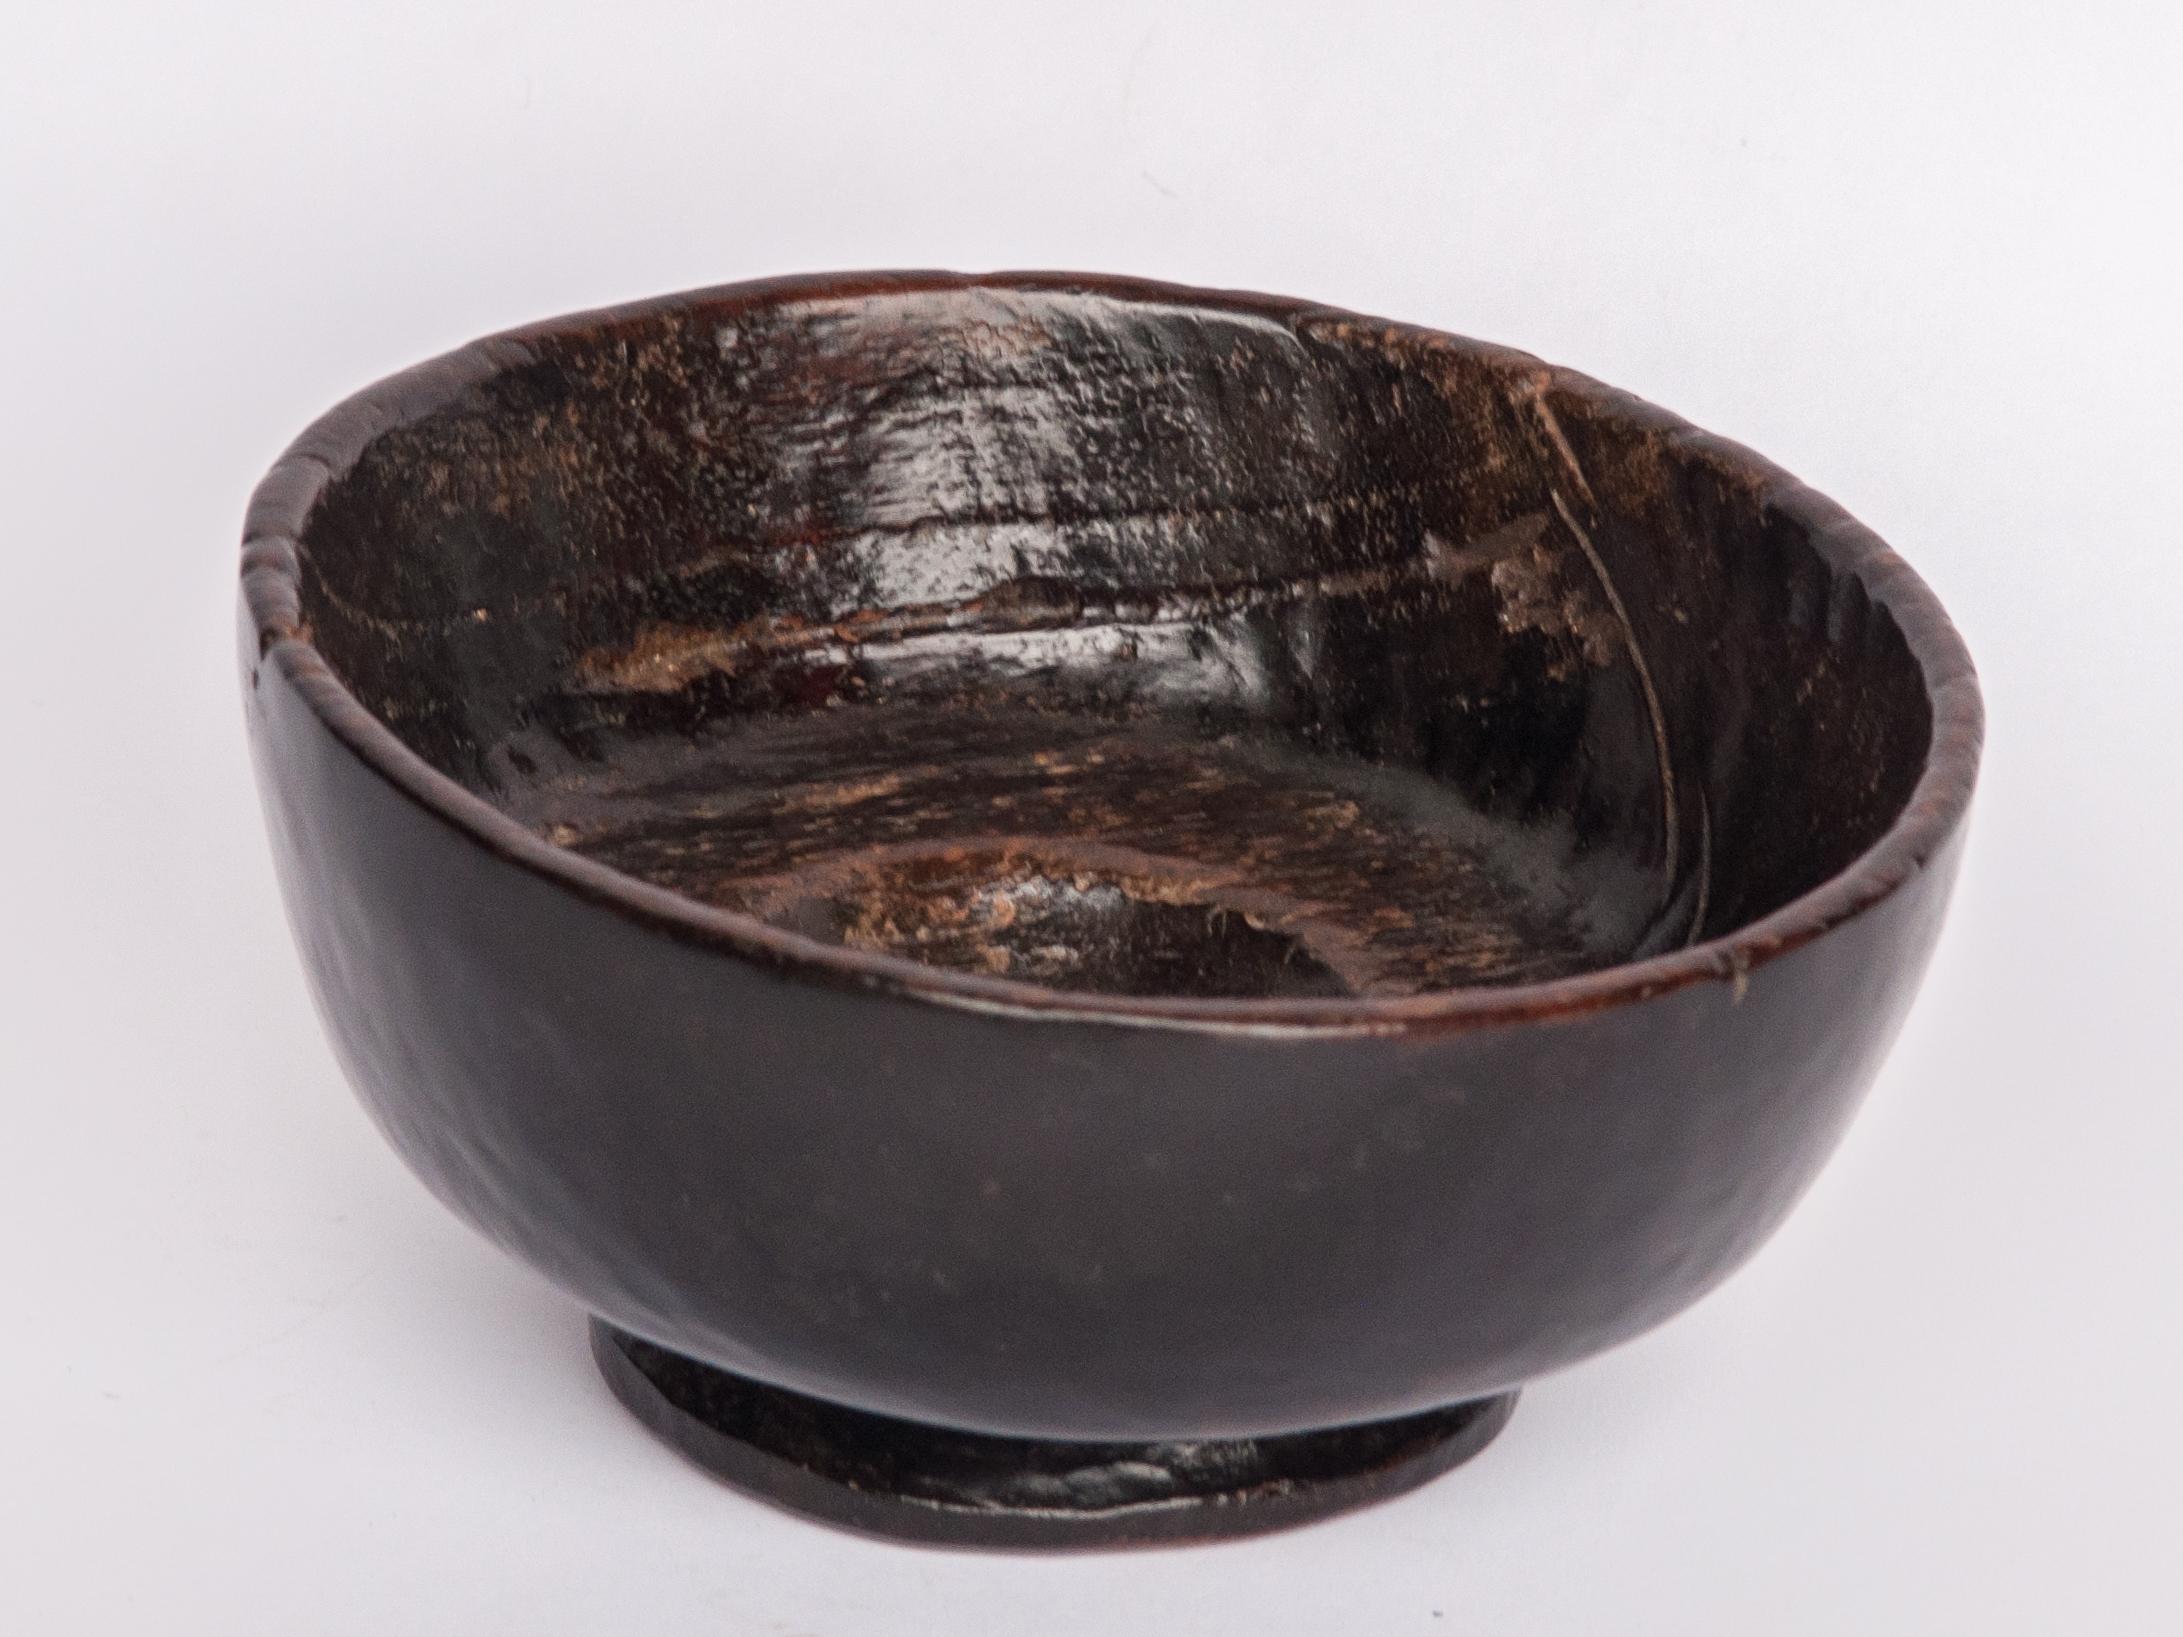 Indonesian Vintage Wooden Mortar Bowl, Footed, Sumba, Indonesia, Mid-20th Century